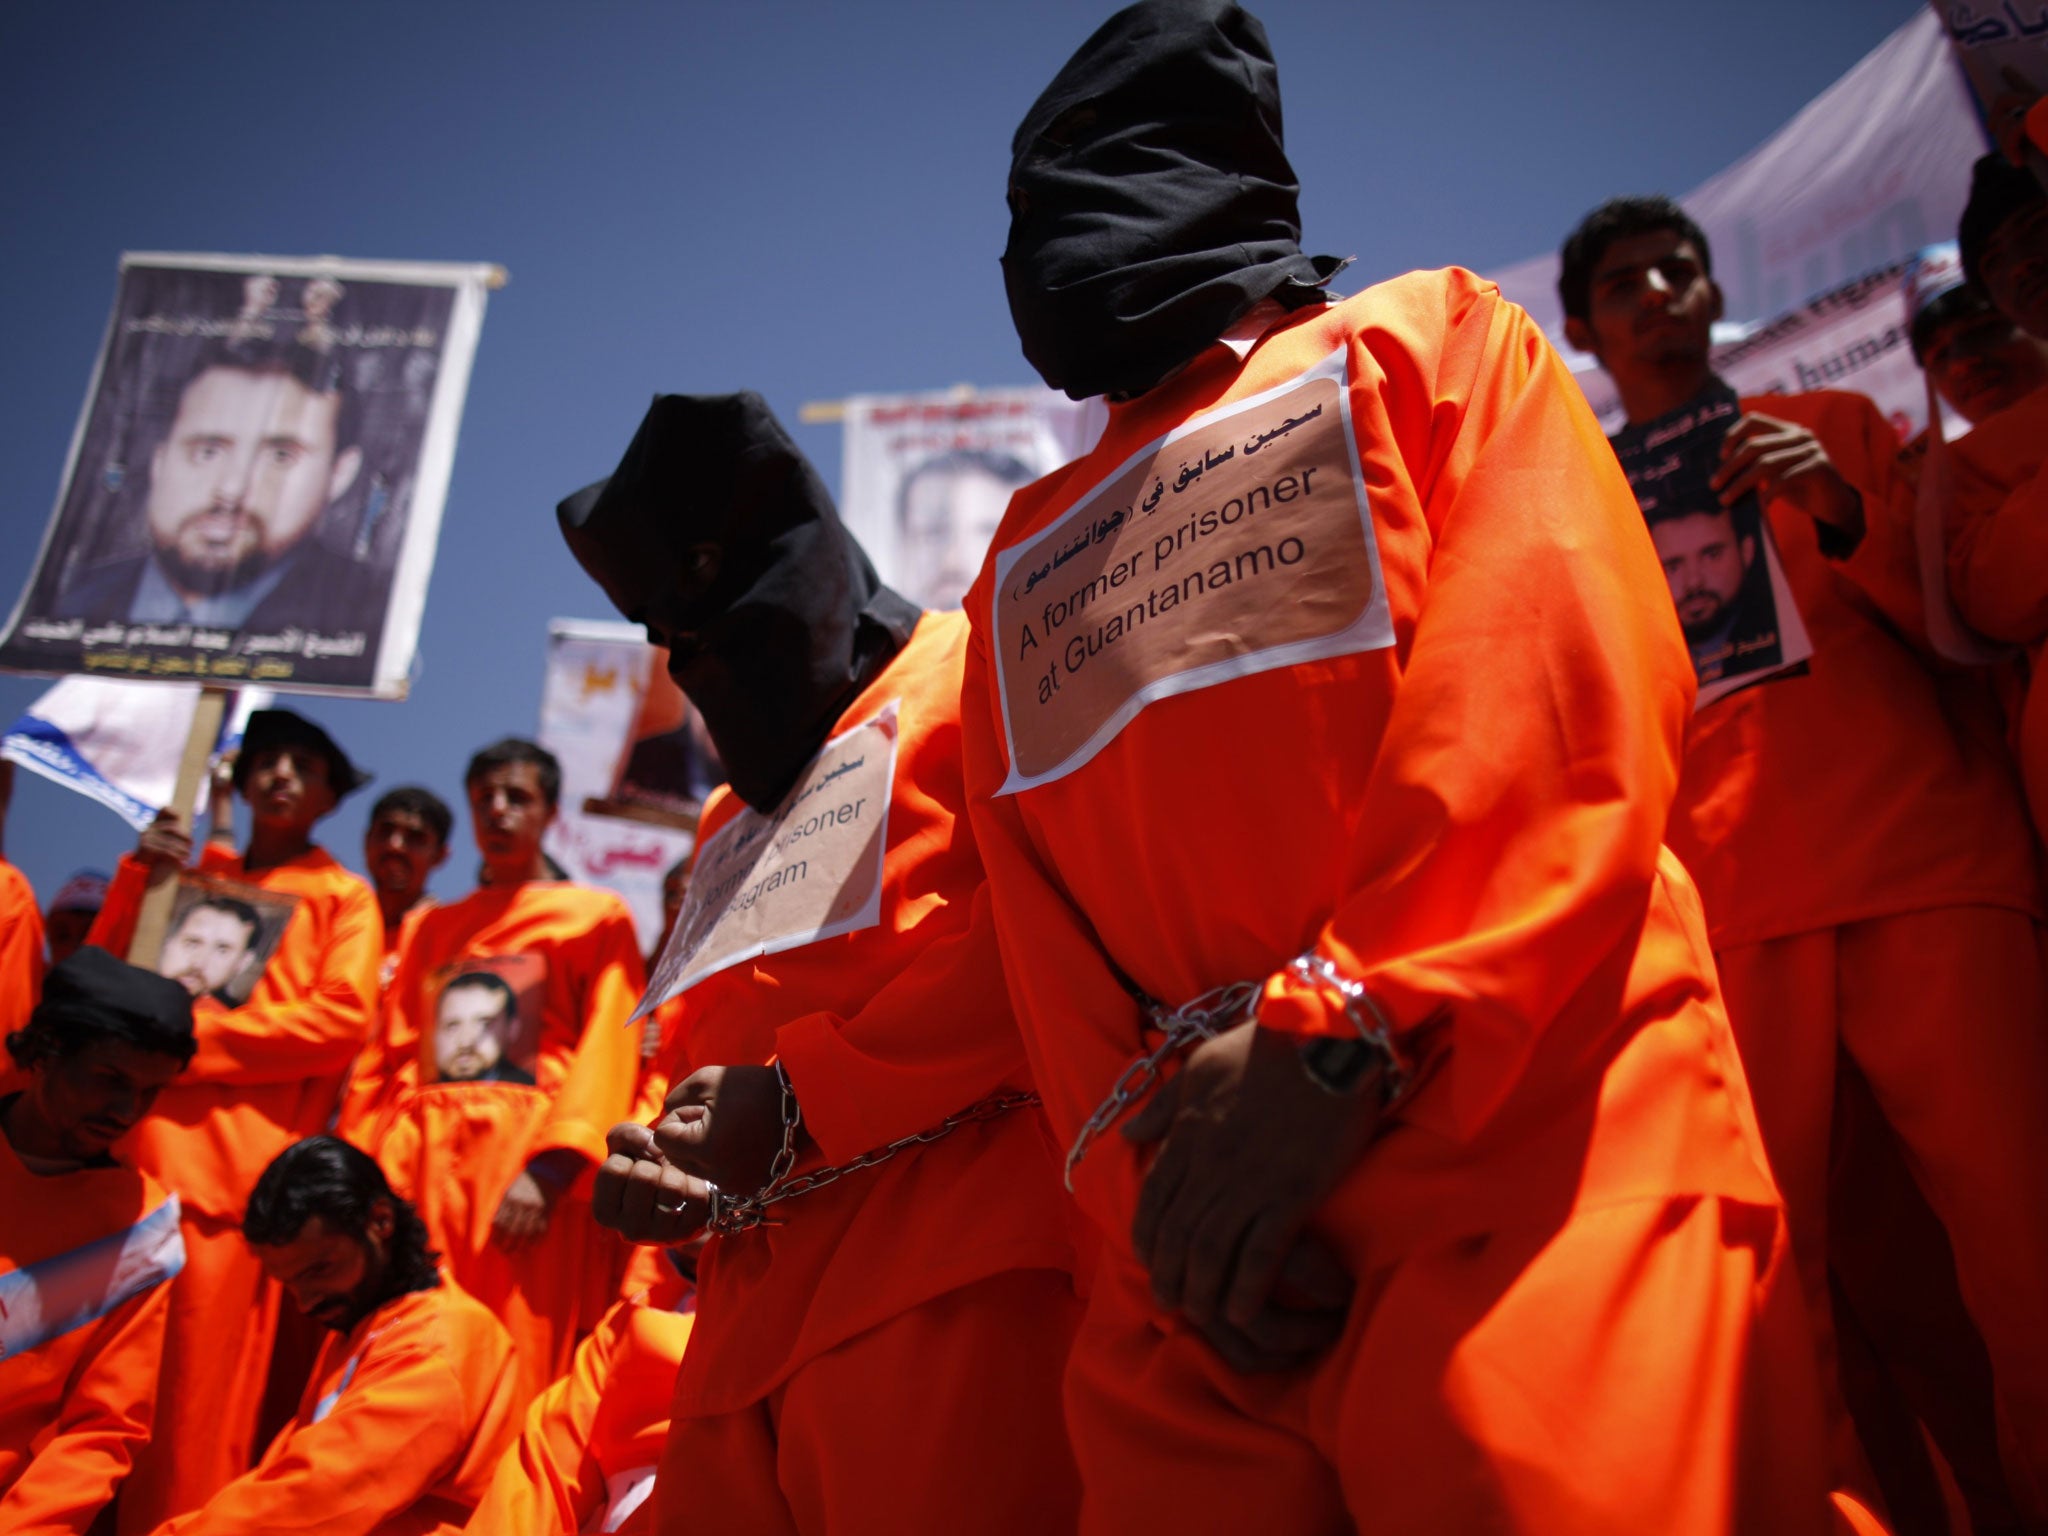 Former Guantanamo Bay detainees wear black hoods during a protest